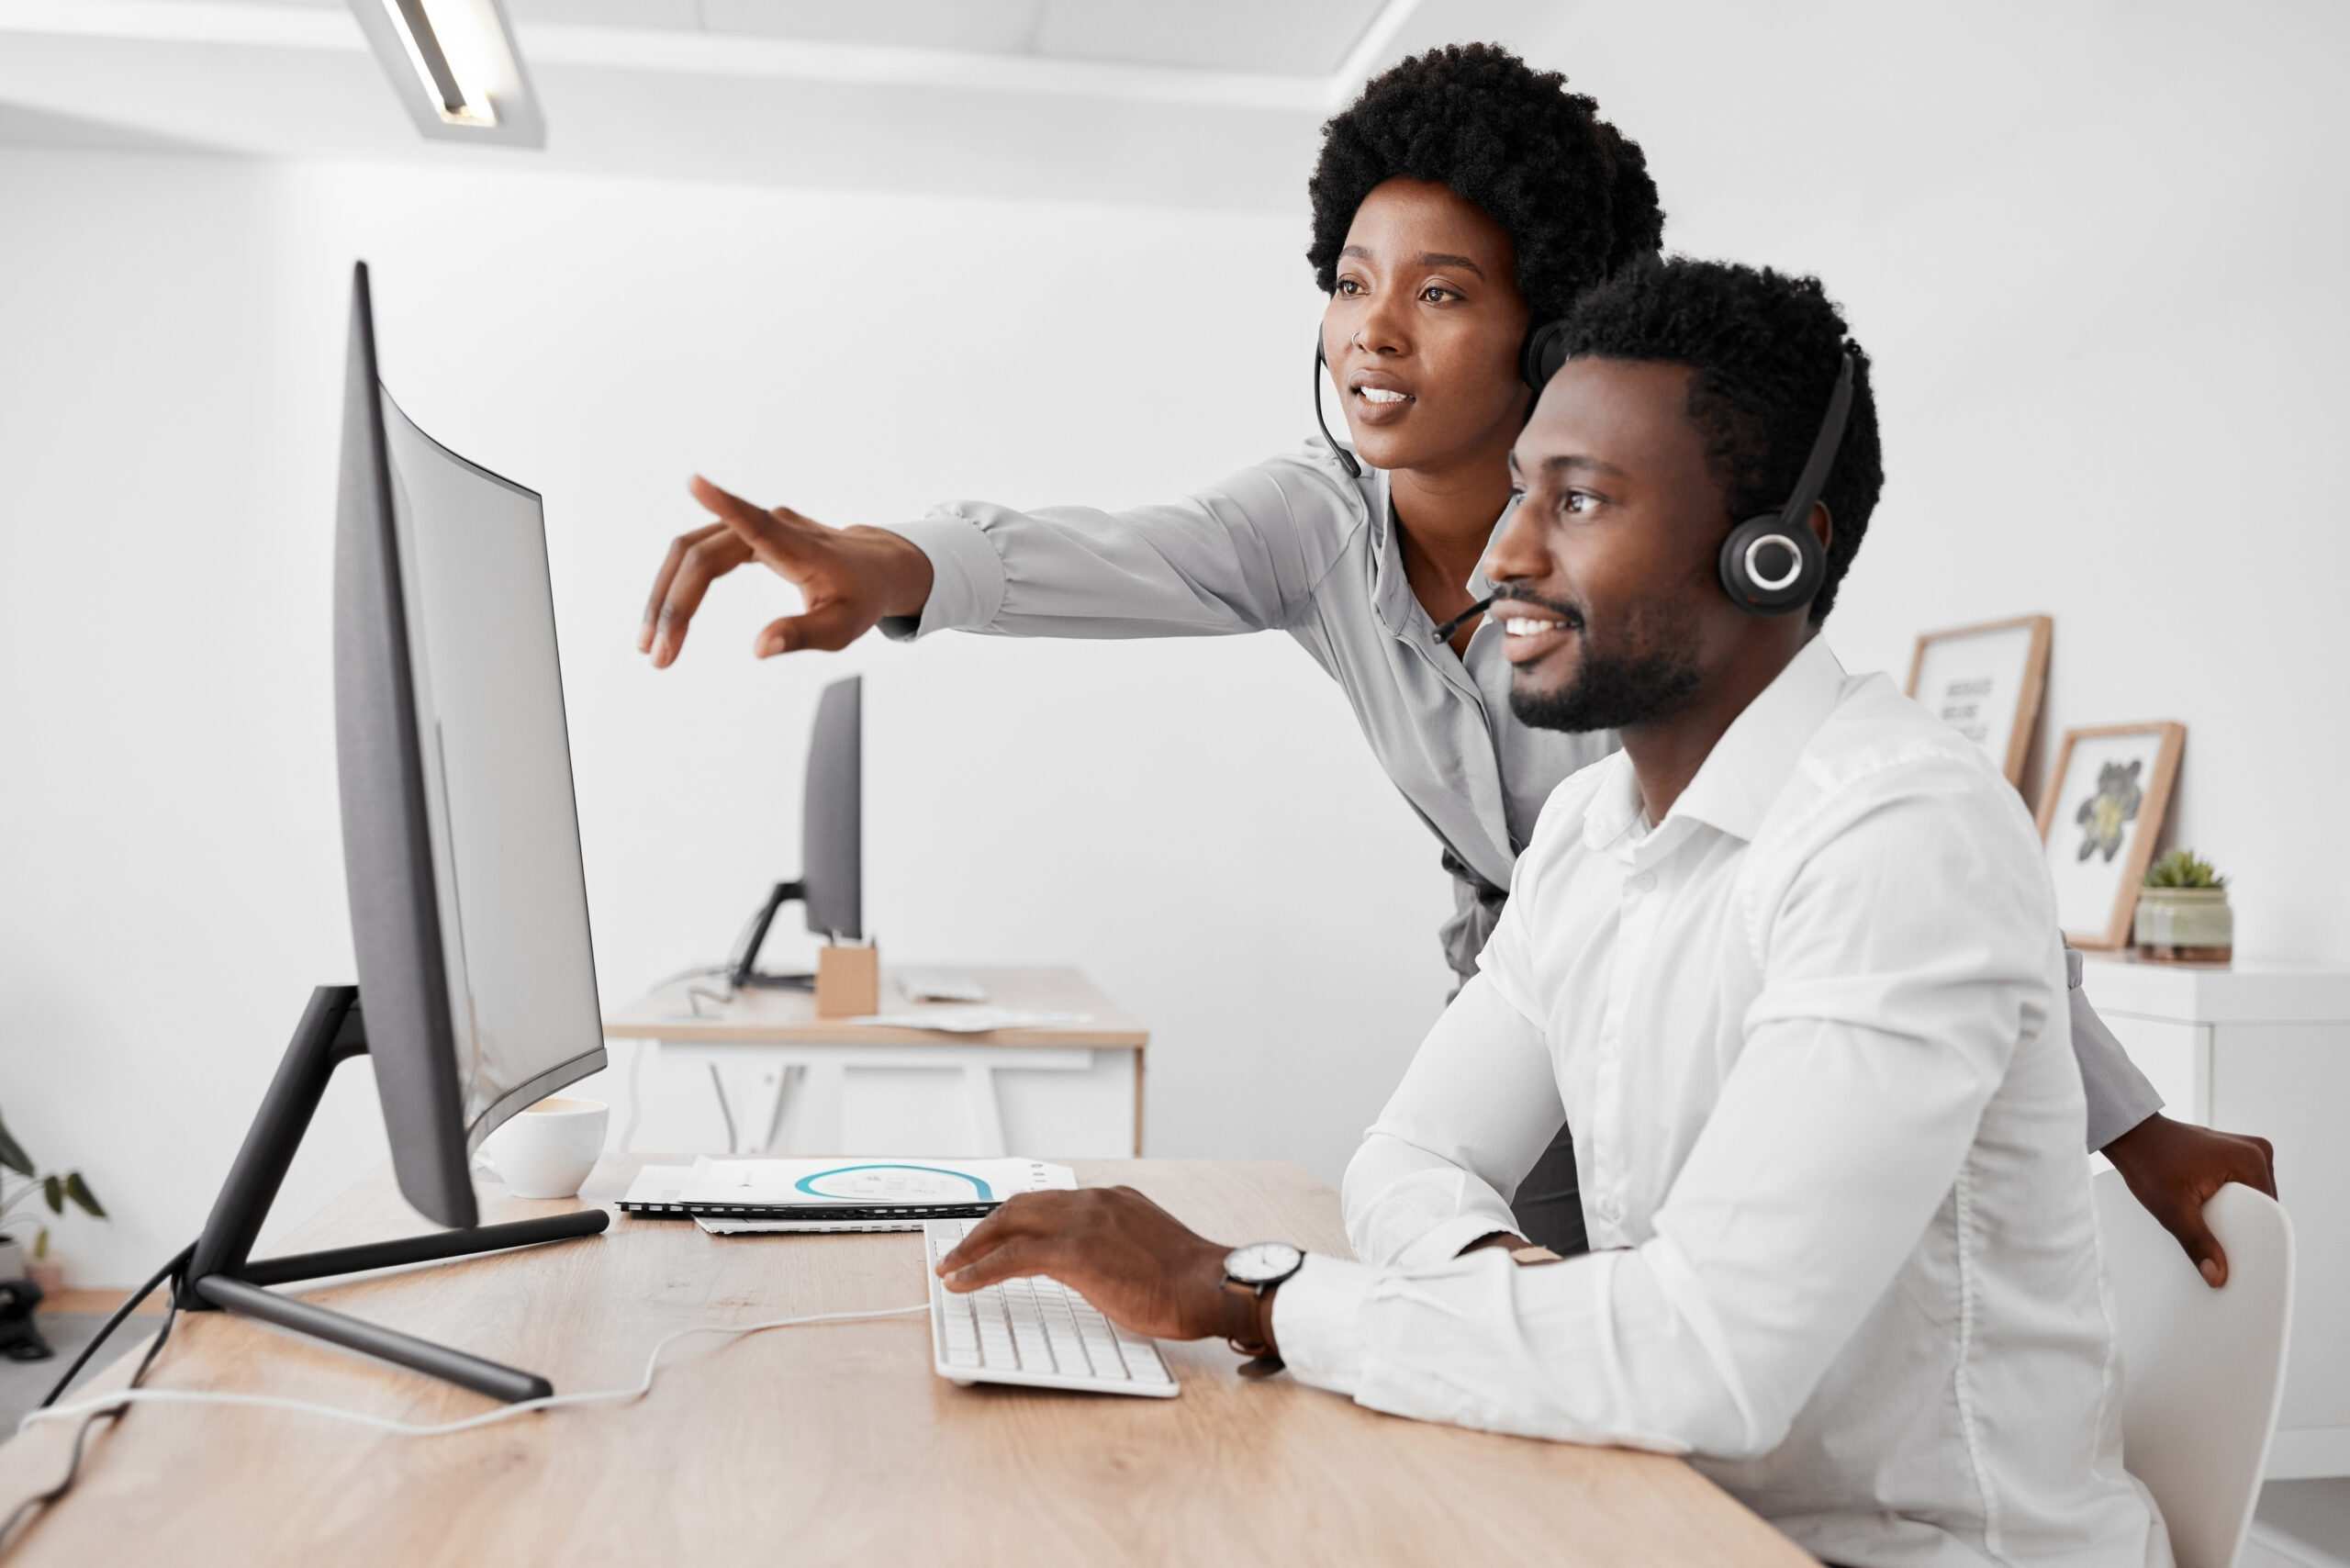 Call center, agency and mentor in customer service and telemarketing business at the office. Black people in consulting, desk and contact us support in teamwork, employee advice and help at work.